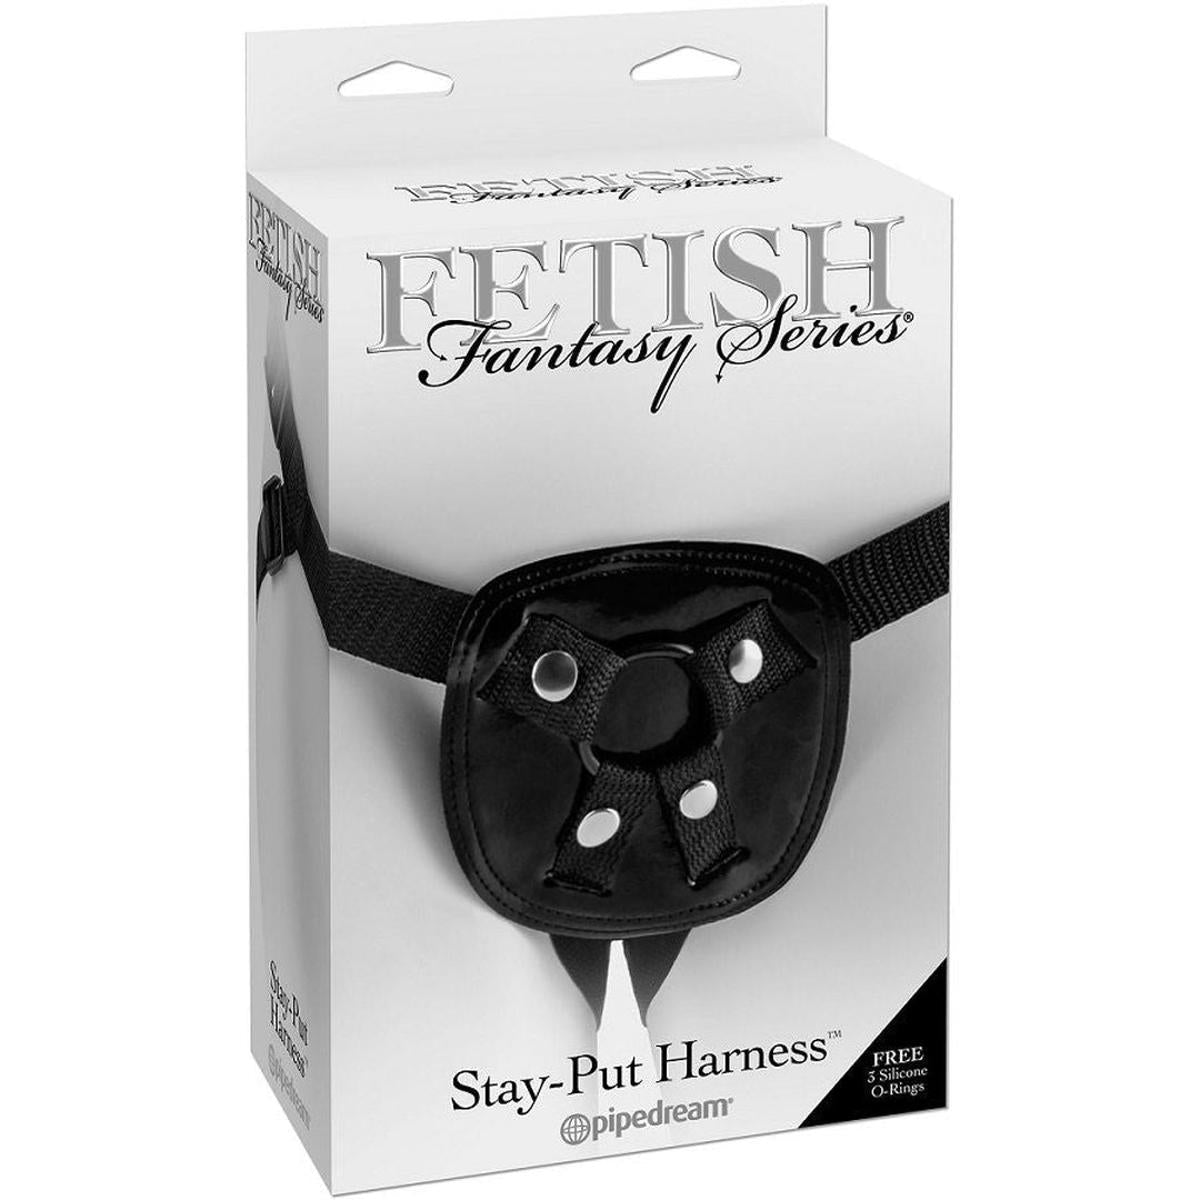 Strap-On "Stay Put Harness" - OH MY! FANTASY